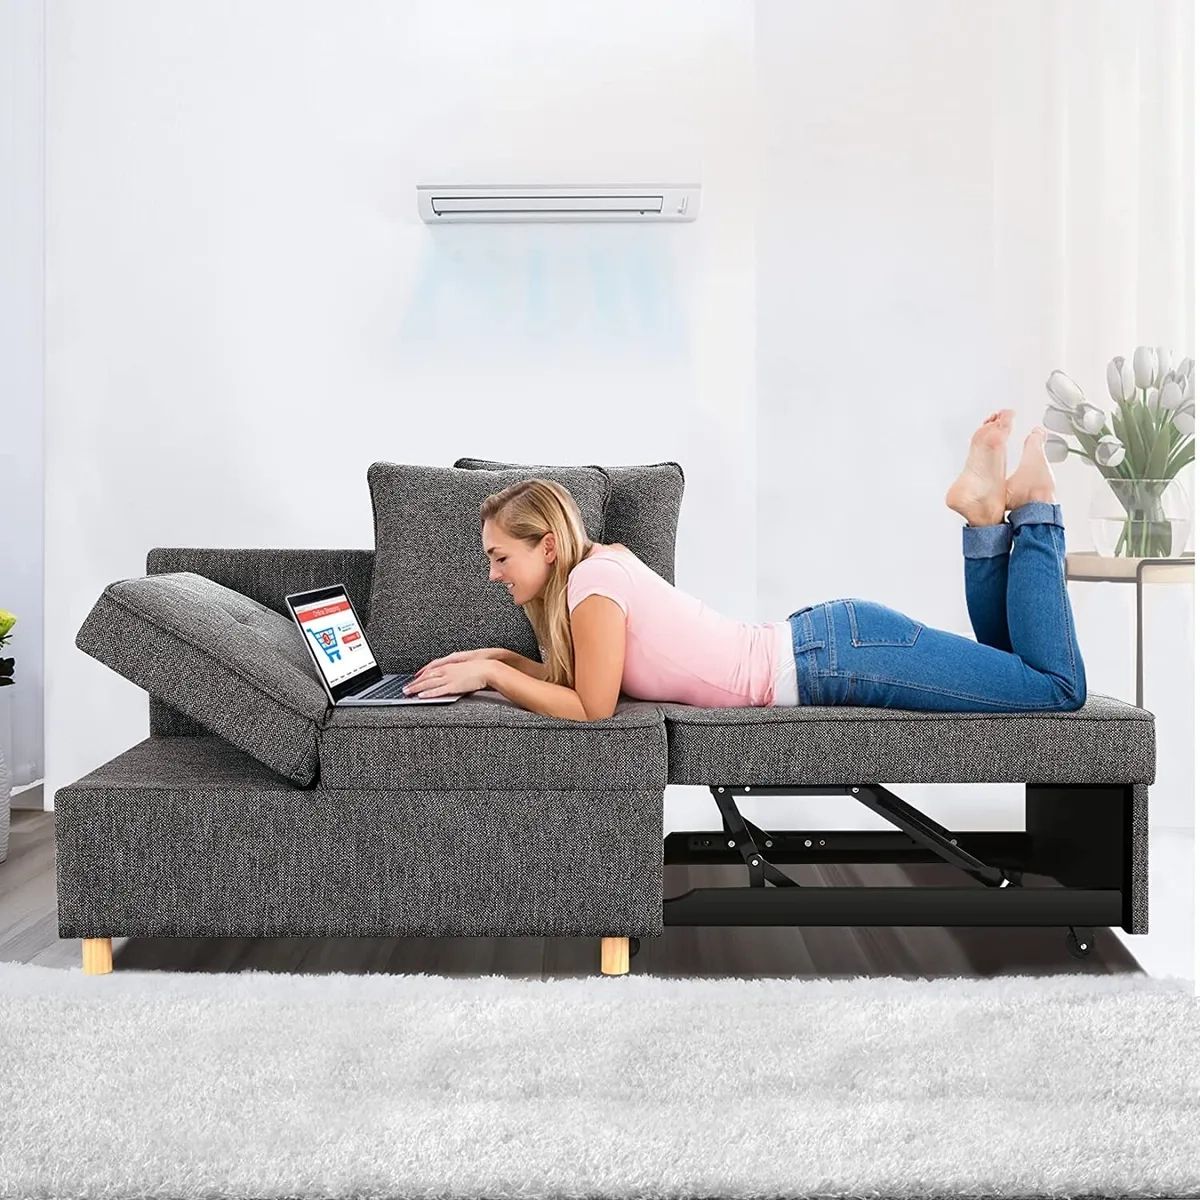 ⭐Folding Ottoman Sofa Bed Convertible Chair 4 In 1 Multi Function Sleeper  Sofa~⭐ | Ebay Throughout 4 In 1 Convertible Sleeper Chair Beds (View 11 of 15)